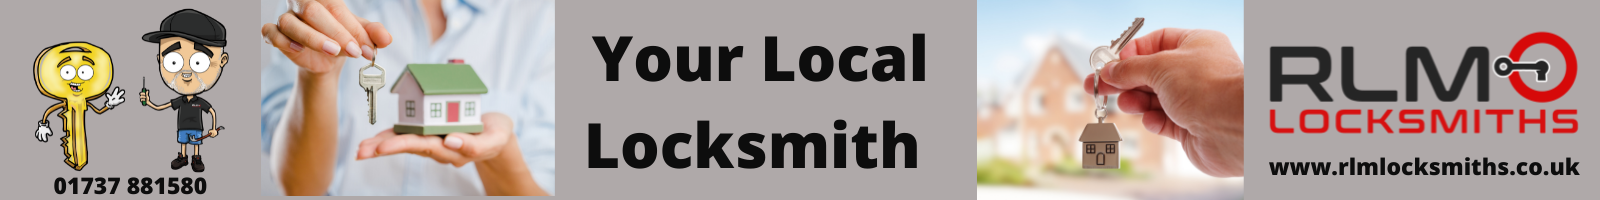 Your Local Locksmith (1).png